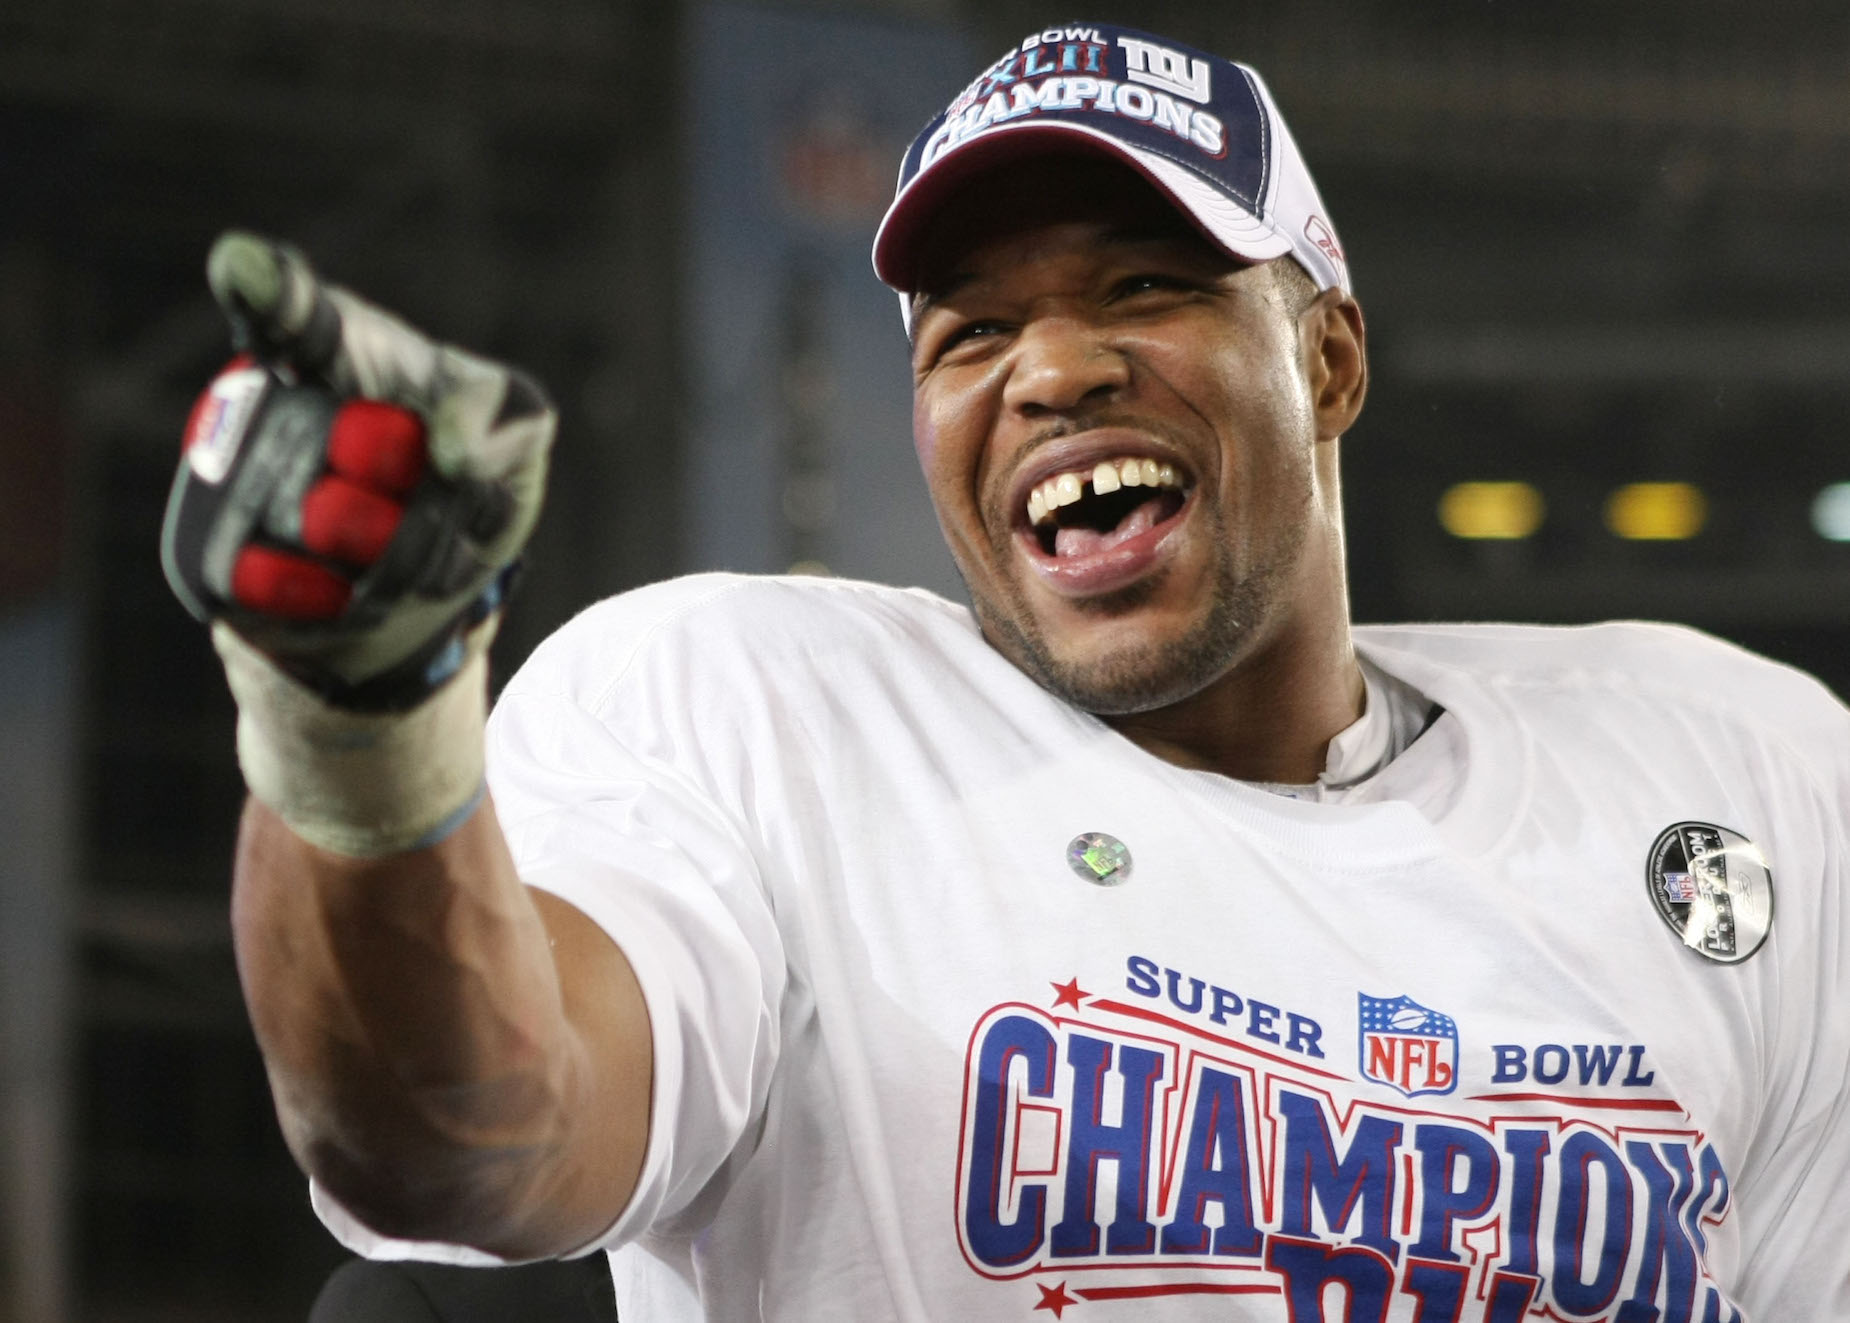 New York Giants great Michael Strahan prepared for NFL games by debating with his socks.